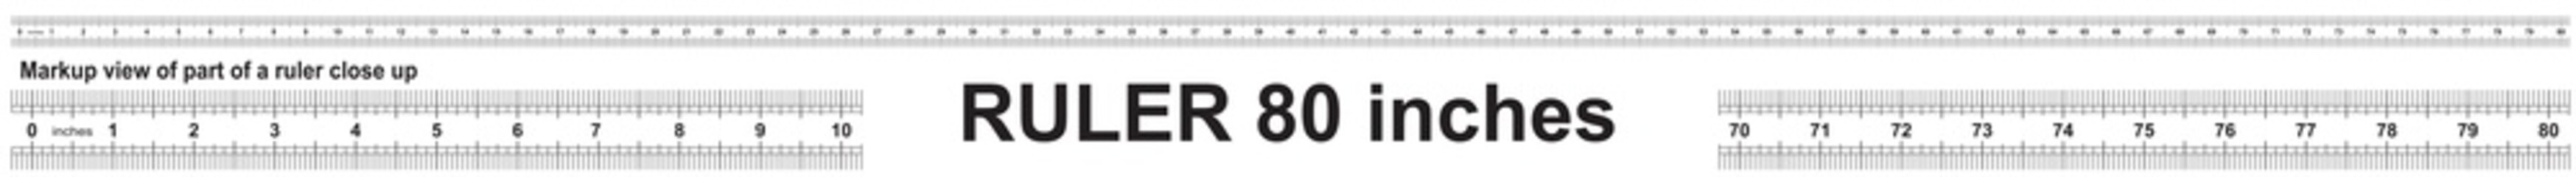 Ruler 80 inch. Precise measuring tool. Inches size indicators.